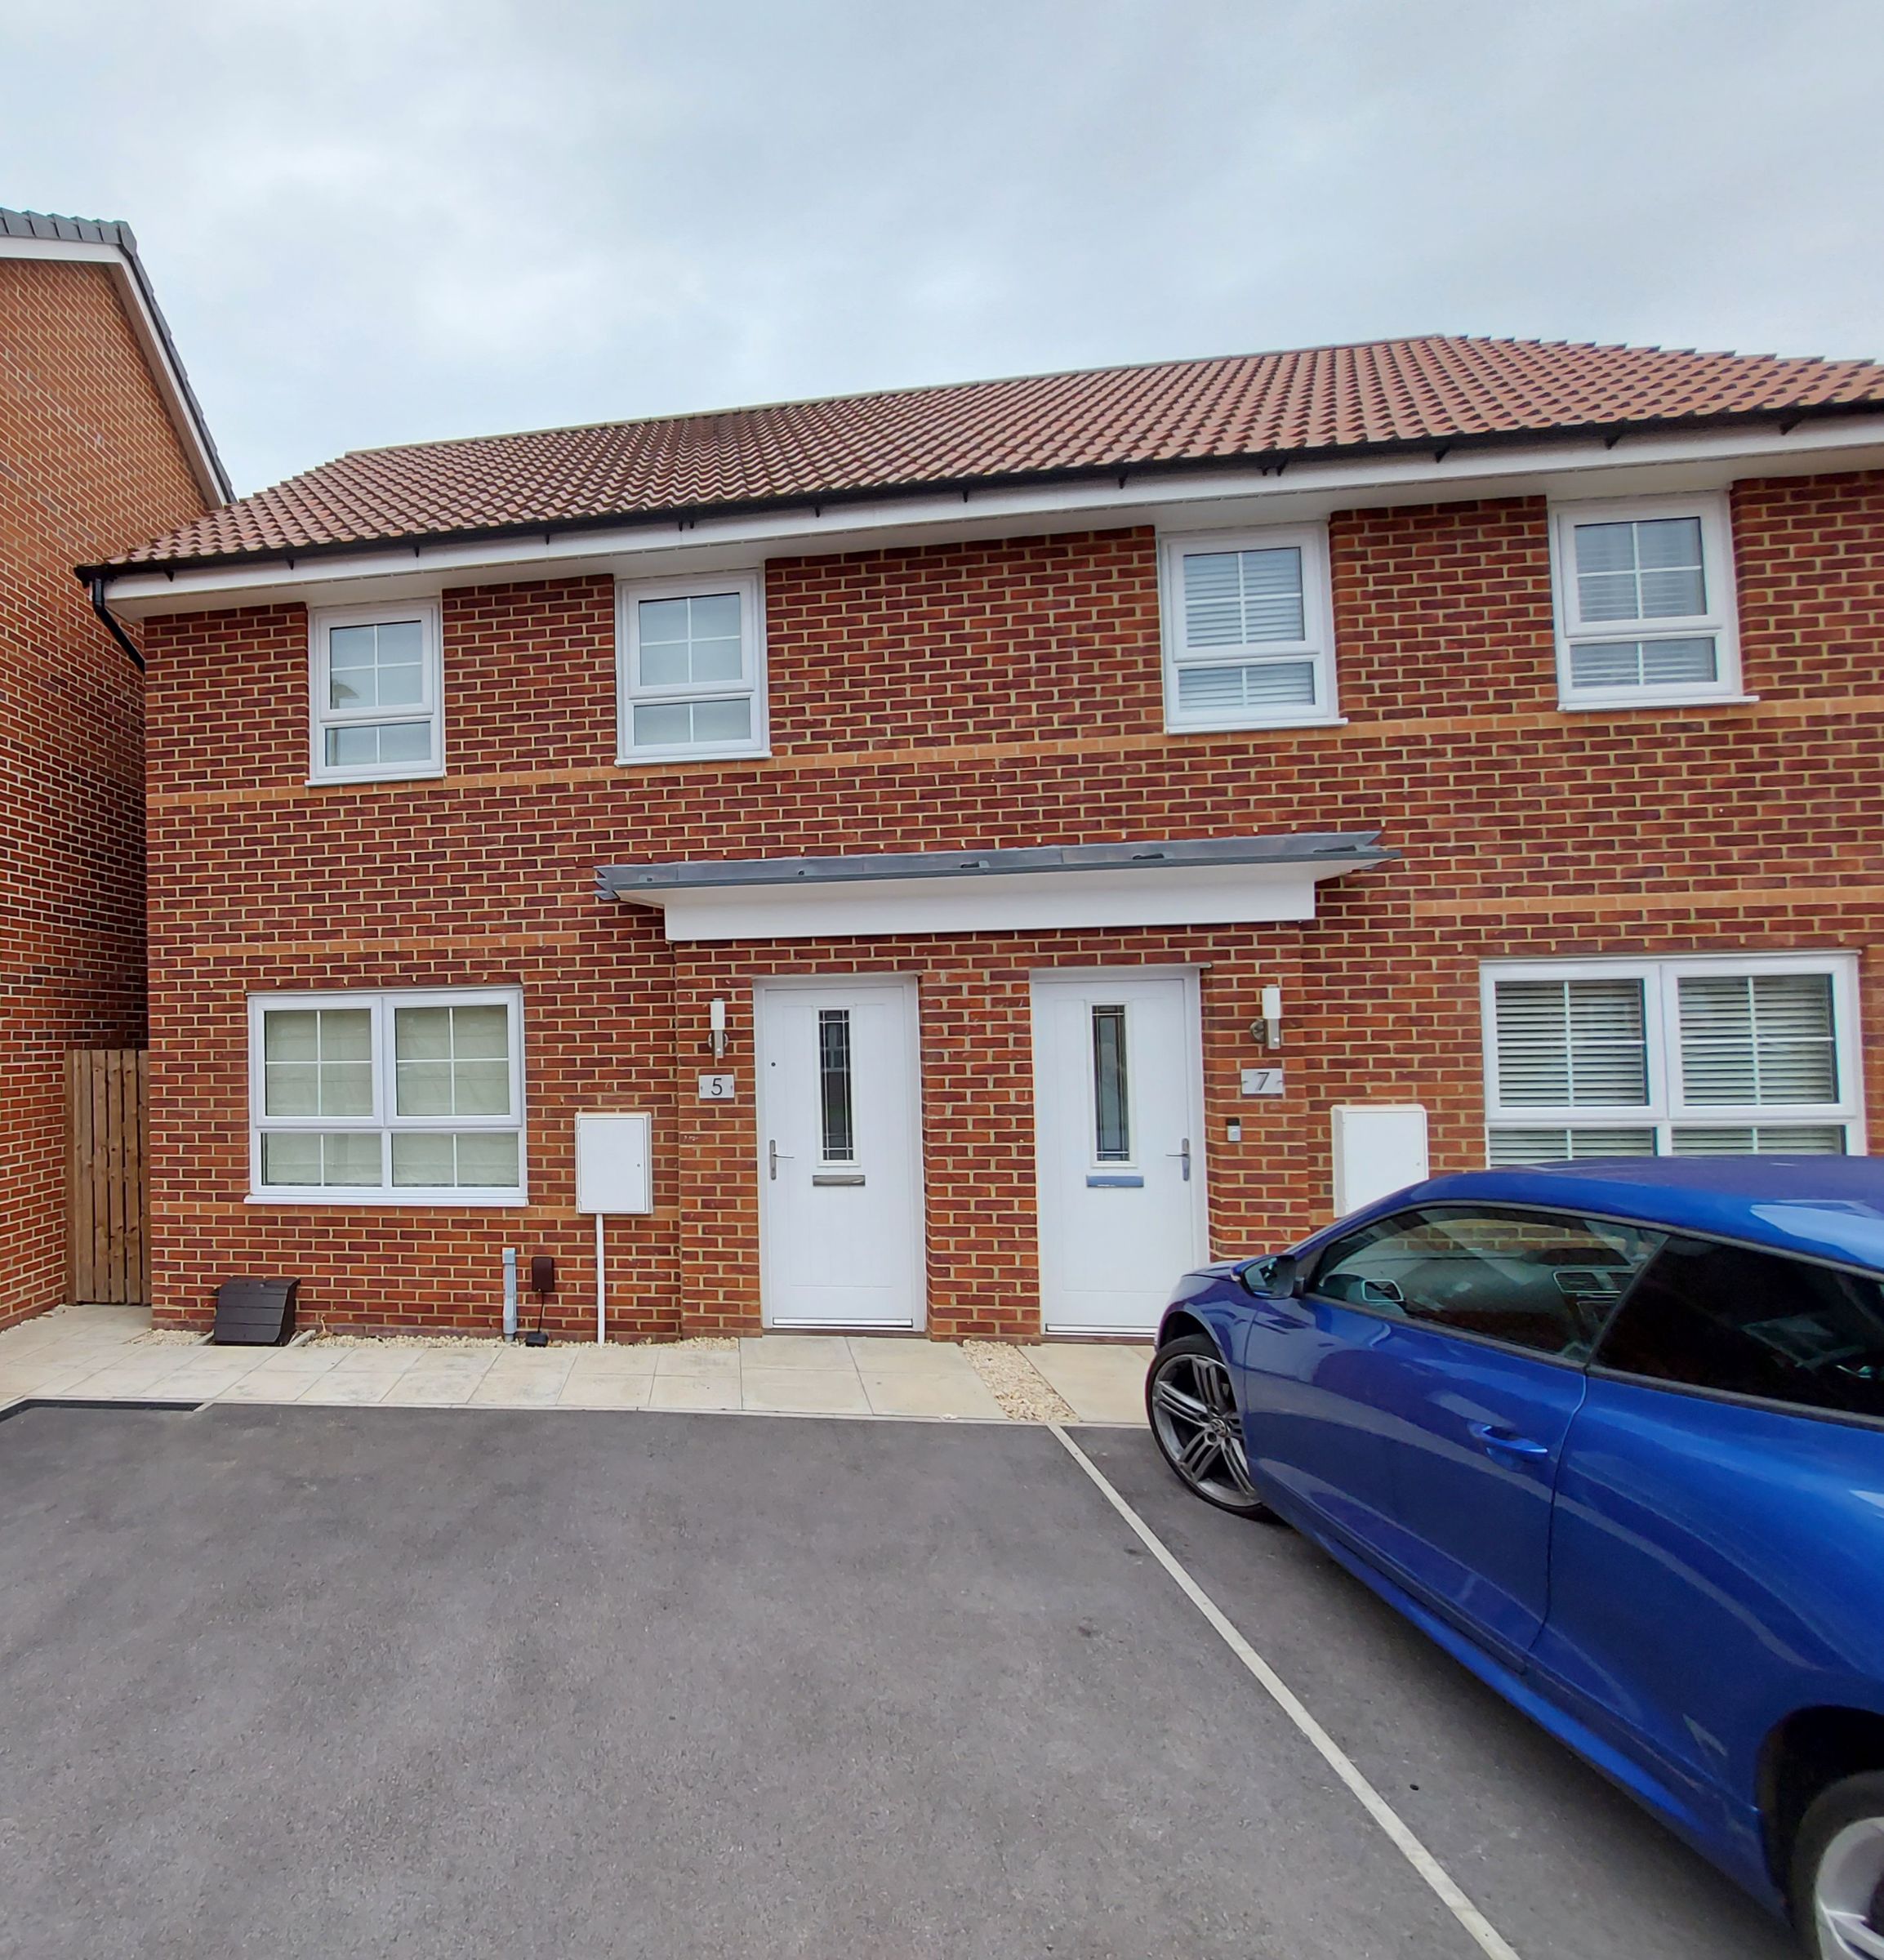 3 bed Semi-Detached House for rent in Doncaster. From 247 Property Services Ltd